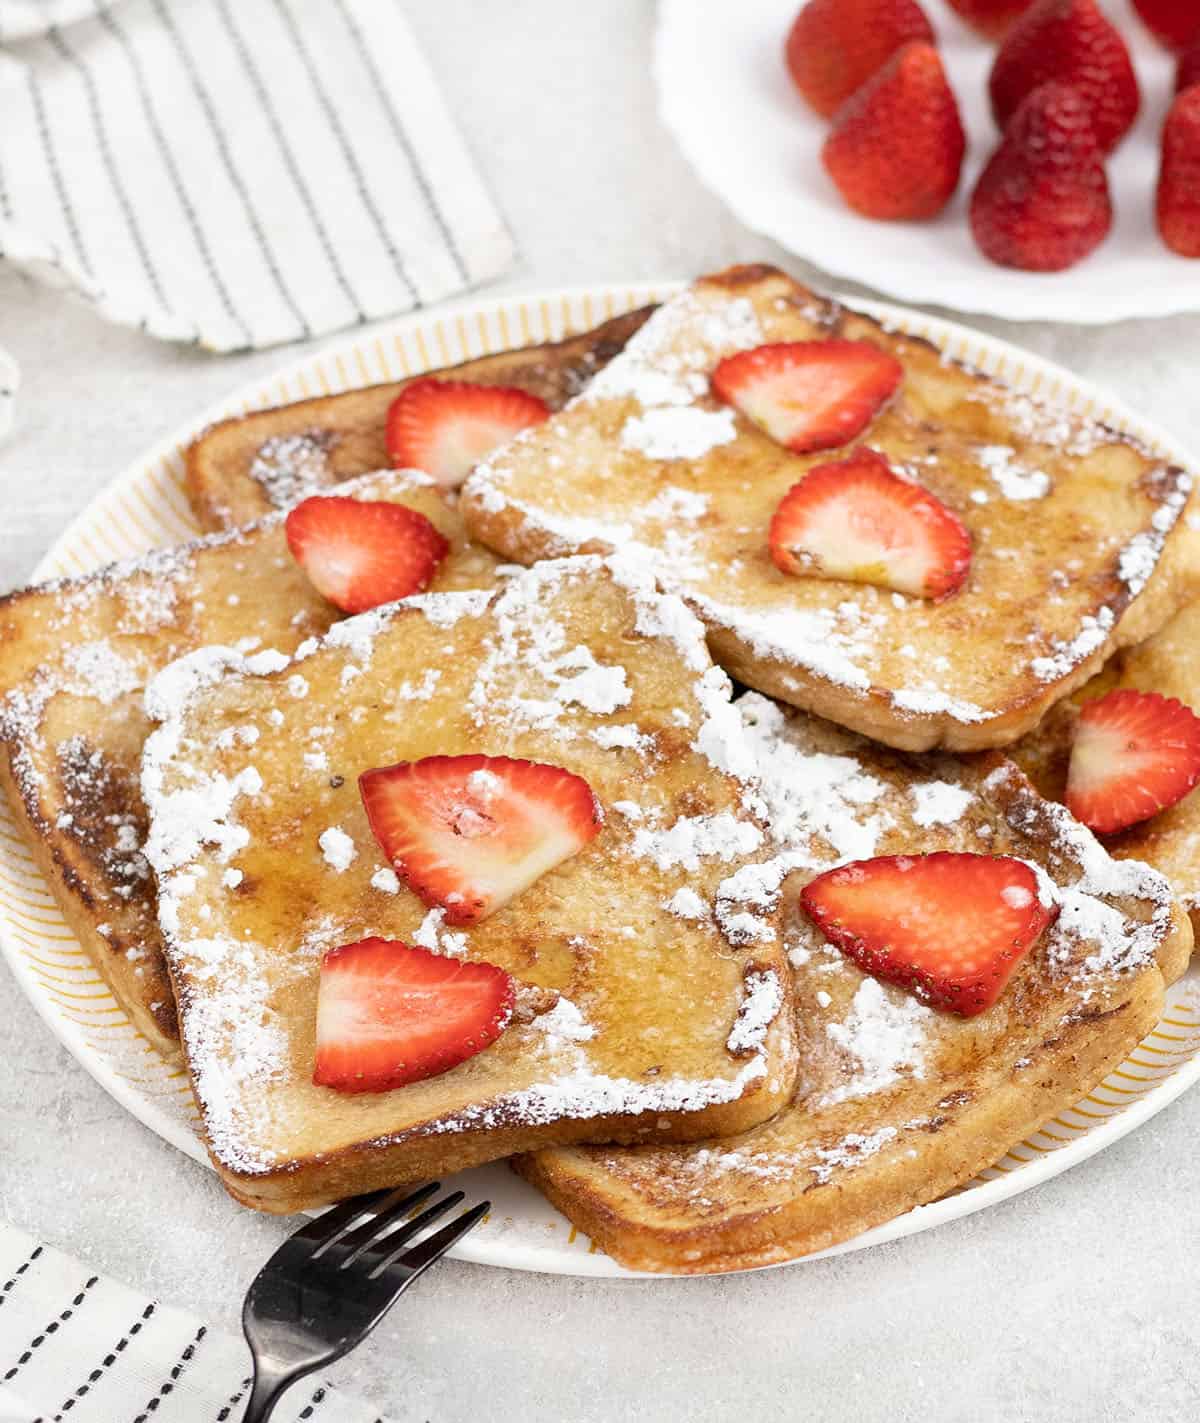 Sourdough French Toast topped with strawberries and powdered sugar